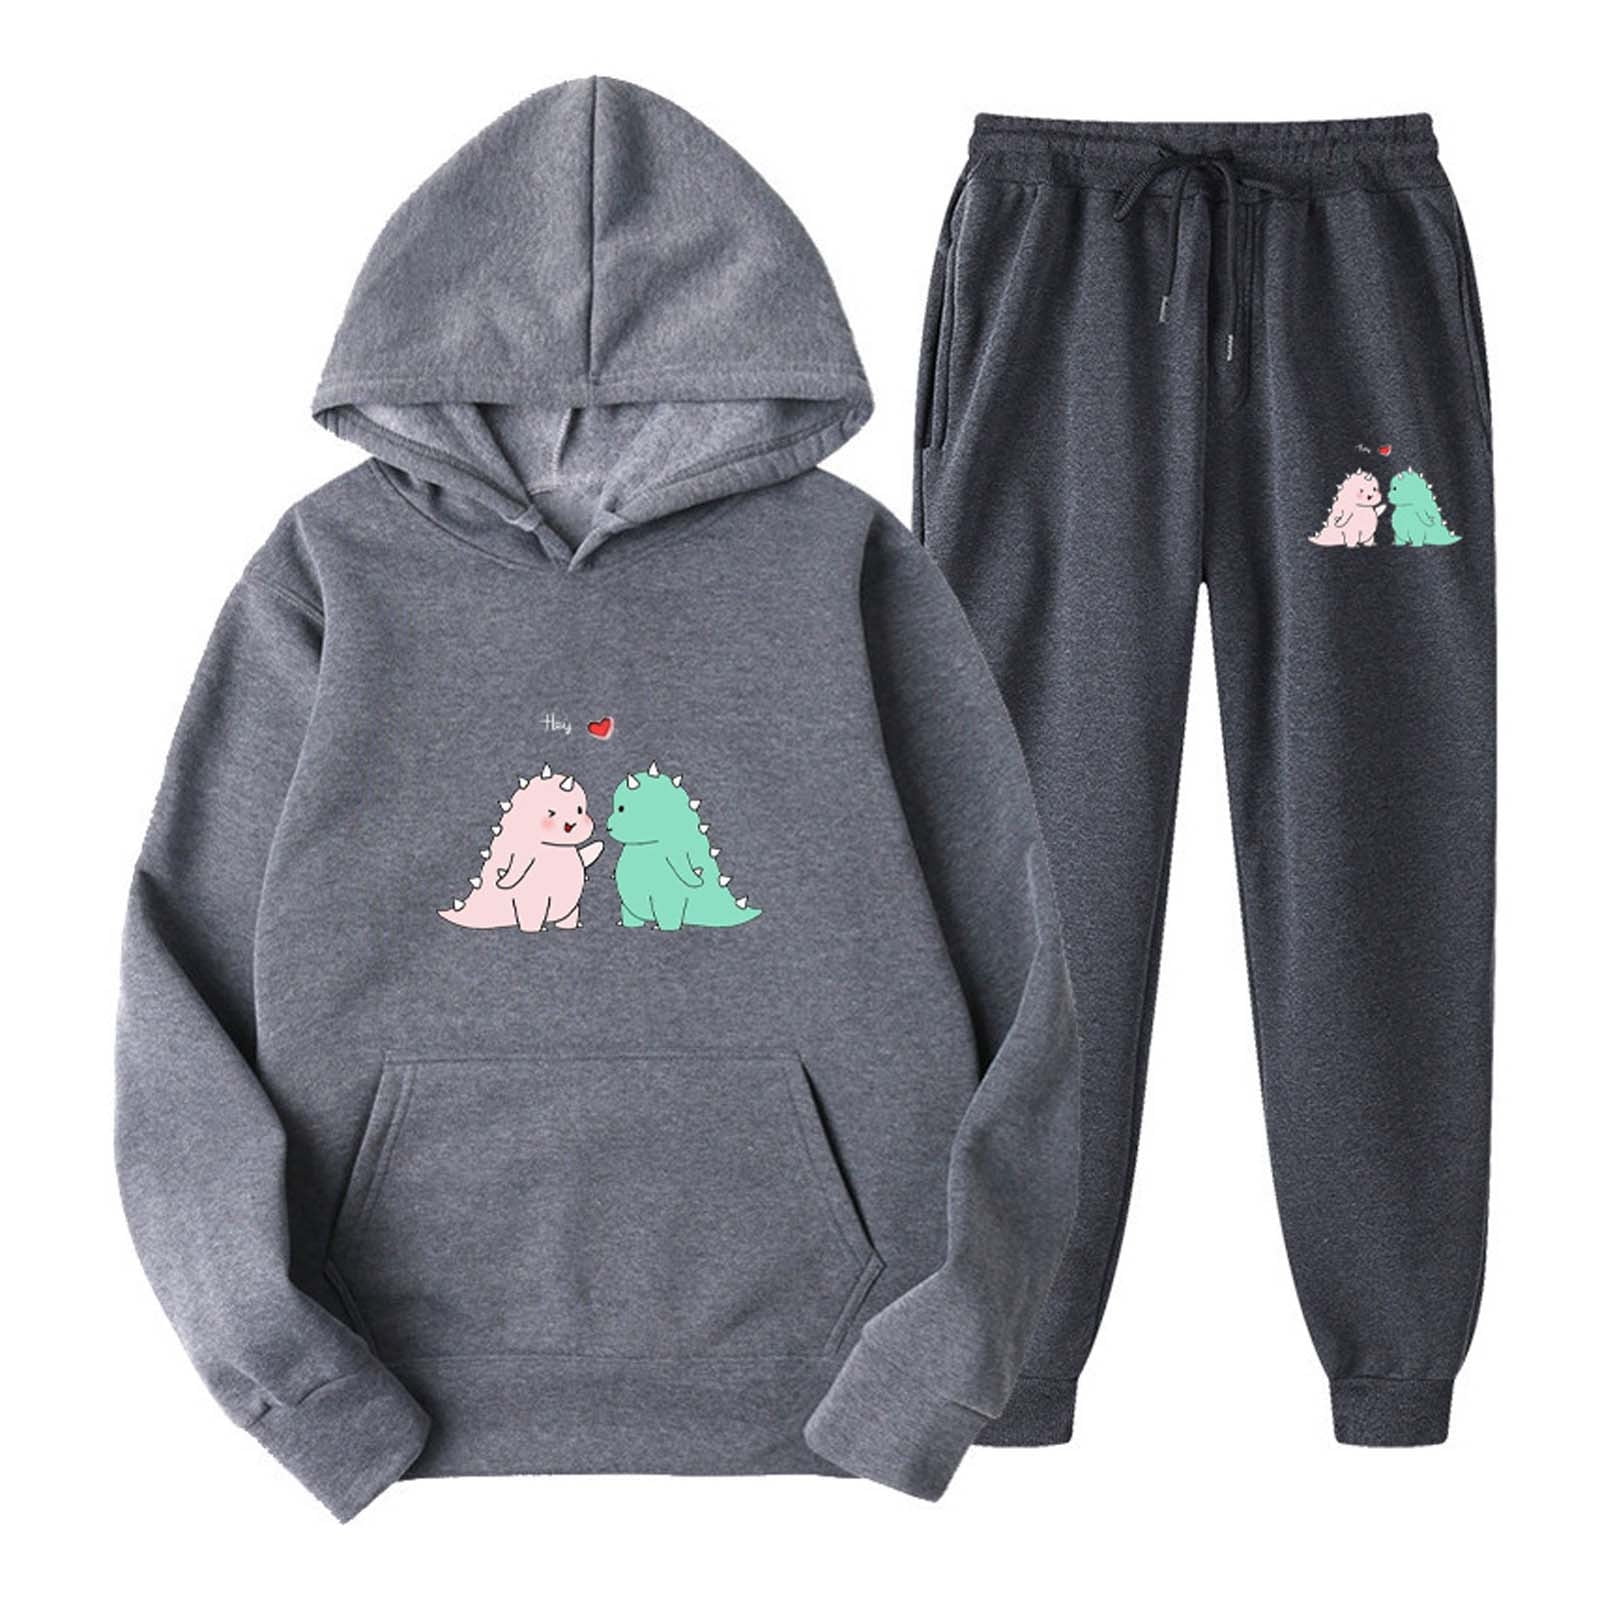 RQYYD Reduced Cute Dinosaur Graphic Hoodies and Sweatpants Set Men Women  Teen Girls Casual Sport Outfits Drawstring Jogger Tracksuits Top Dark Gray M